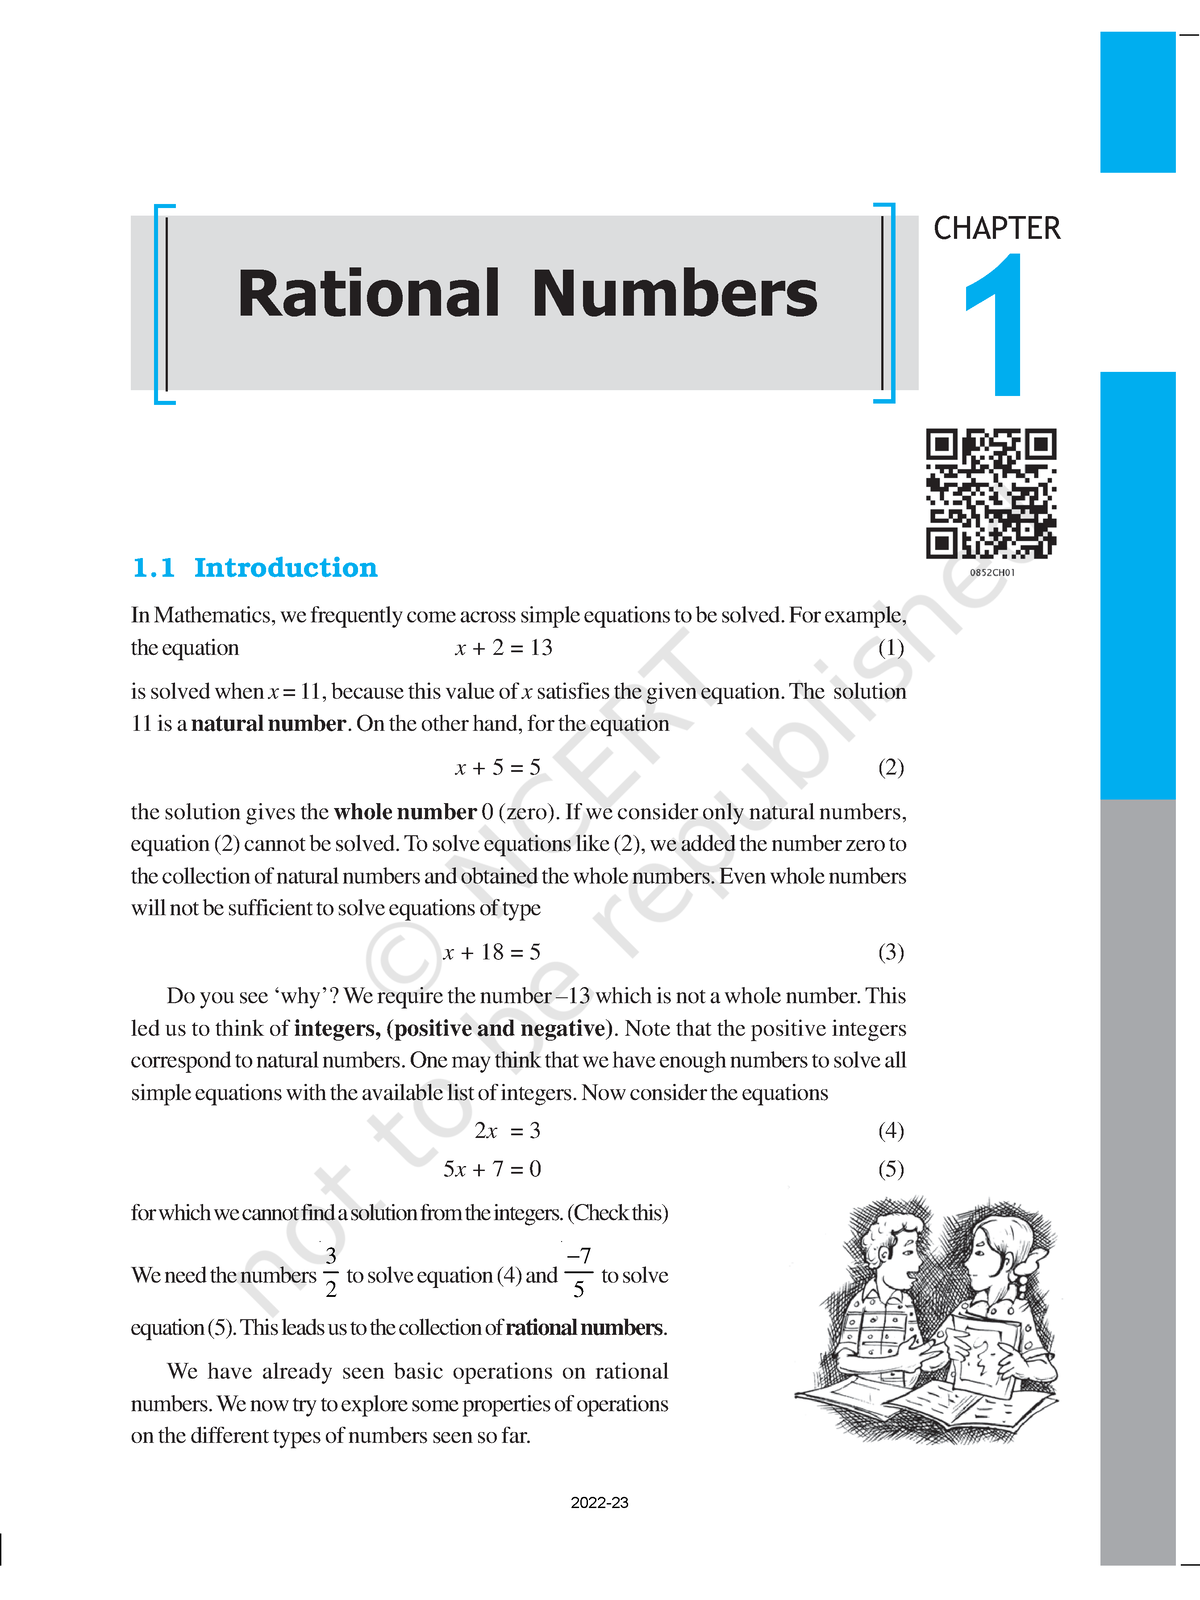 case study questions on rational numbers